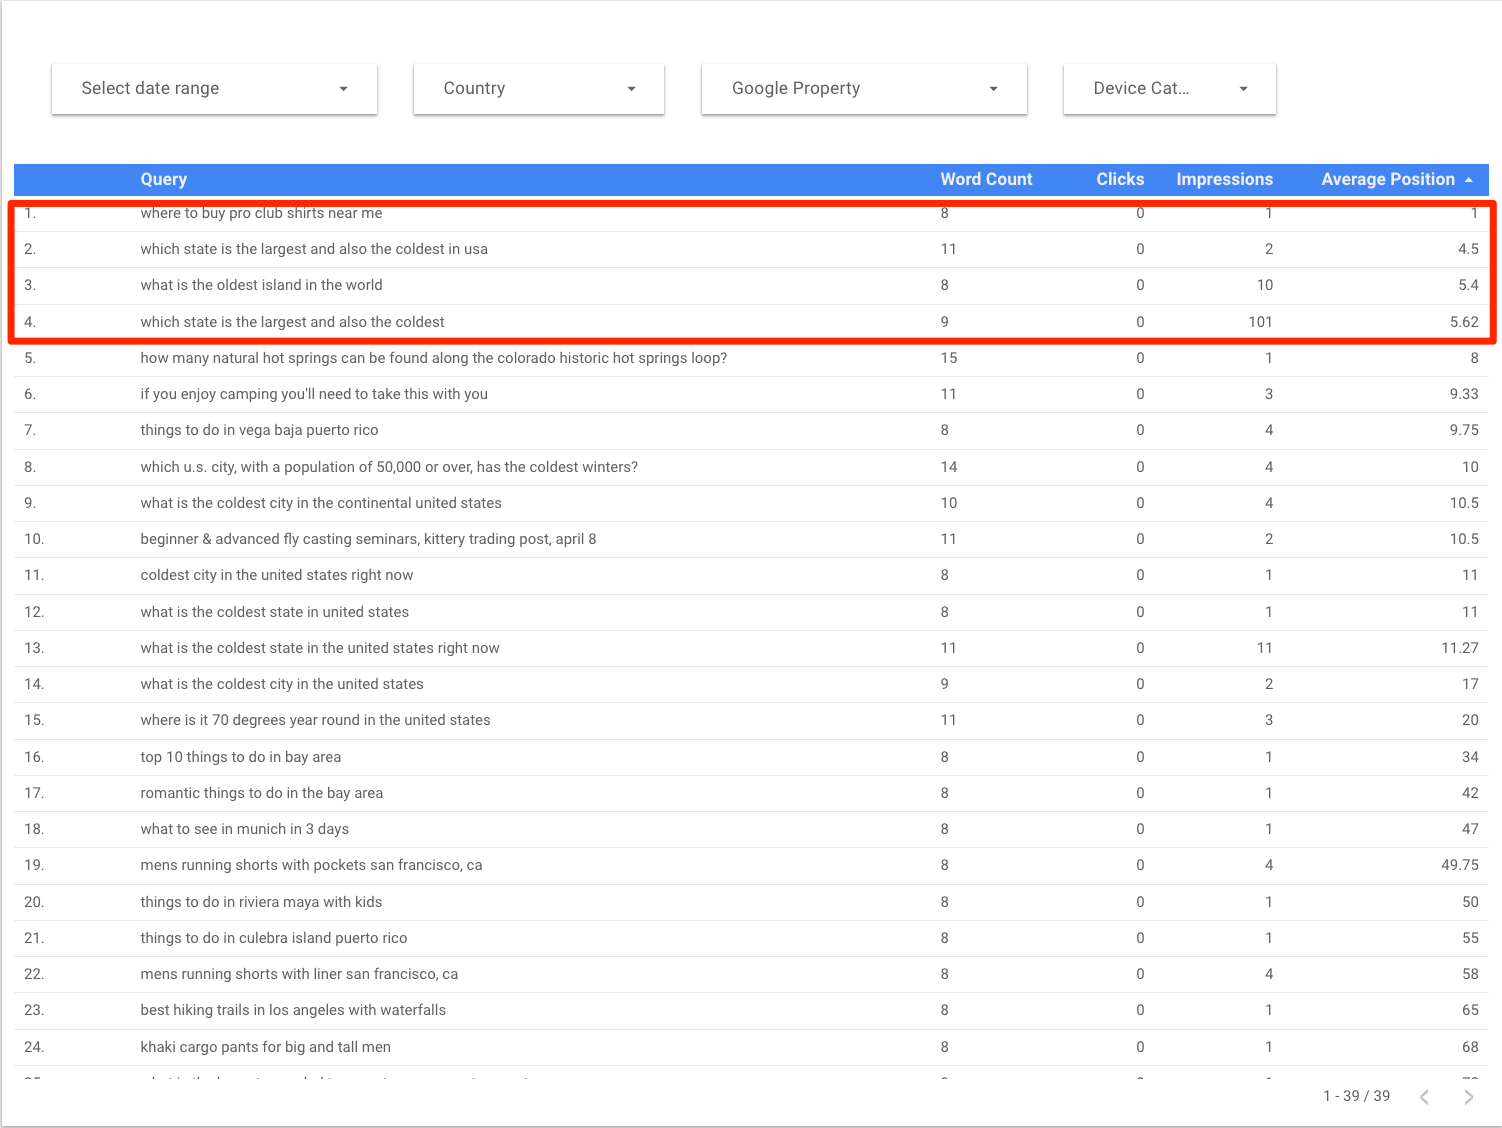 After customizing, the report should show likely voice searches your site is ranking for, and whether those searches are generating traffic. Surprisingly, in this example the highest ranking keywords had low clicks.